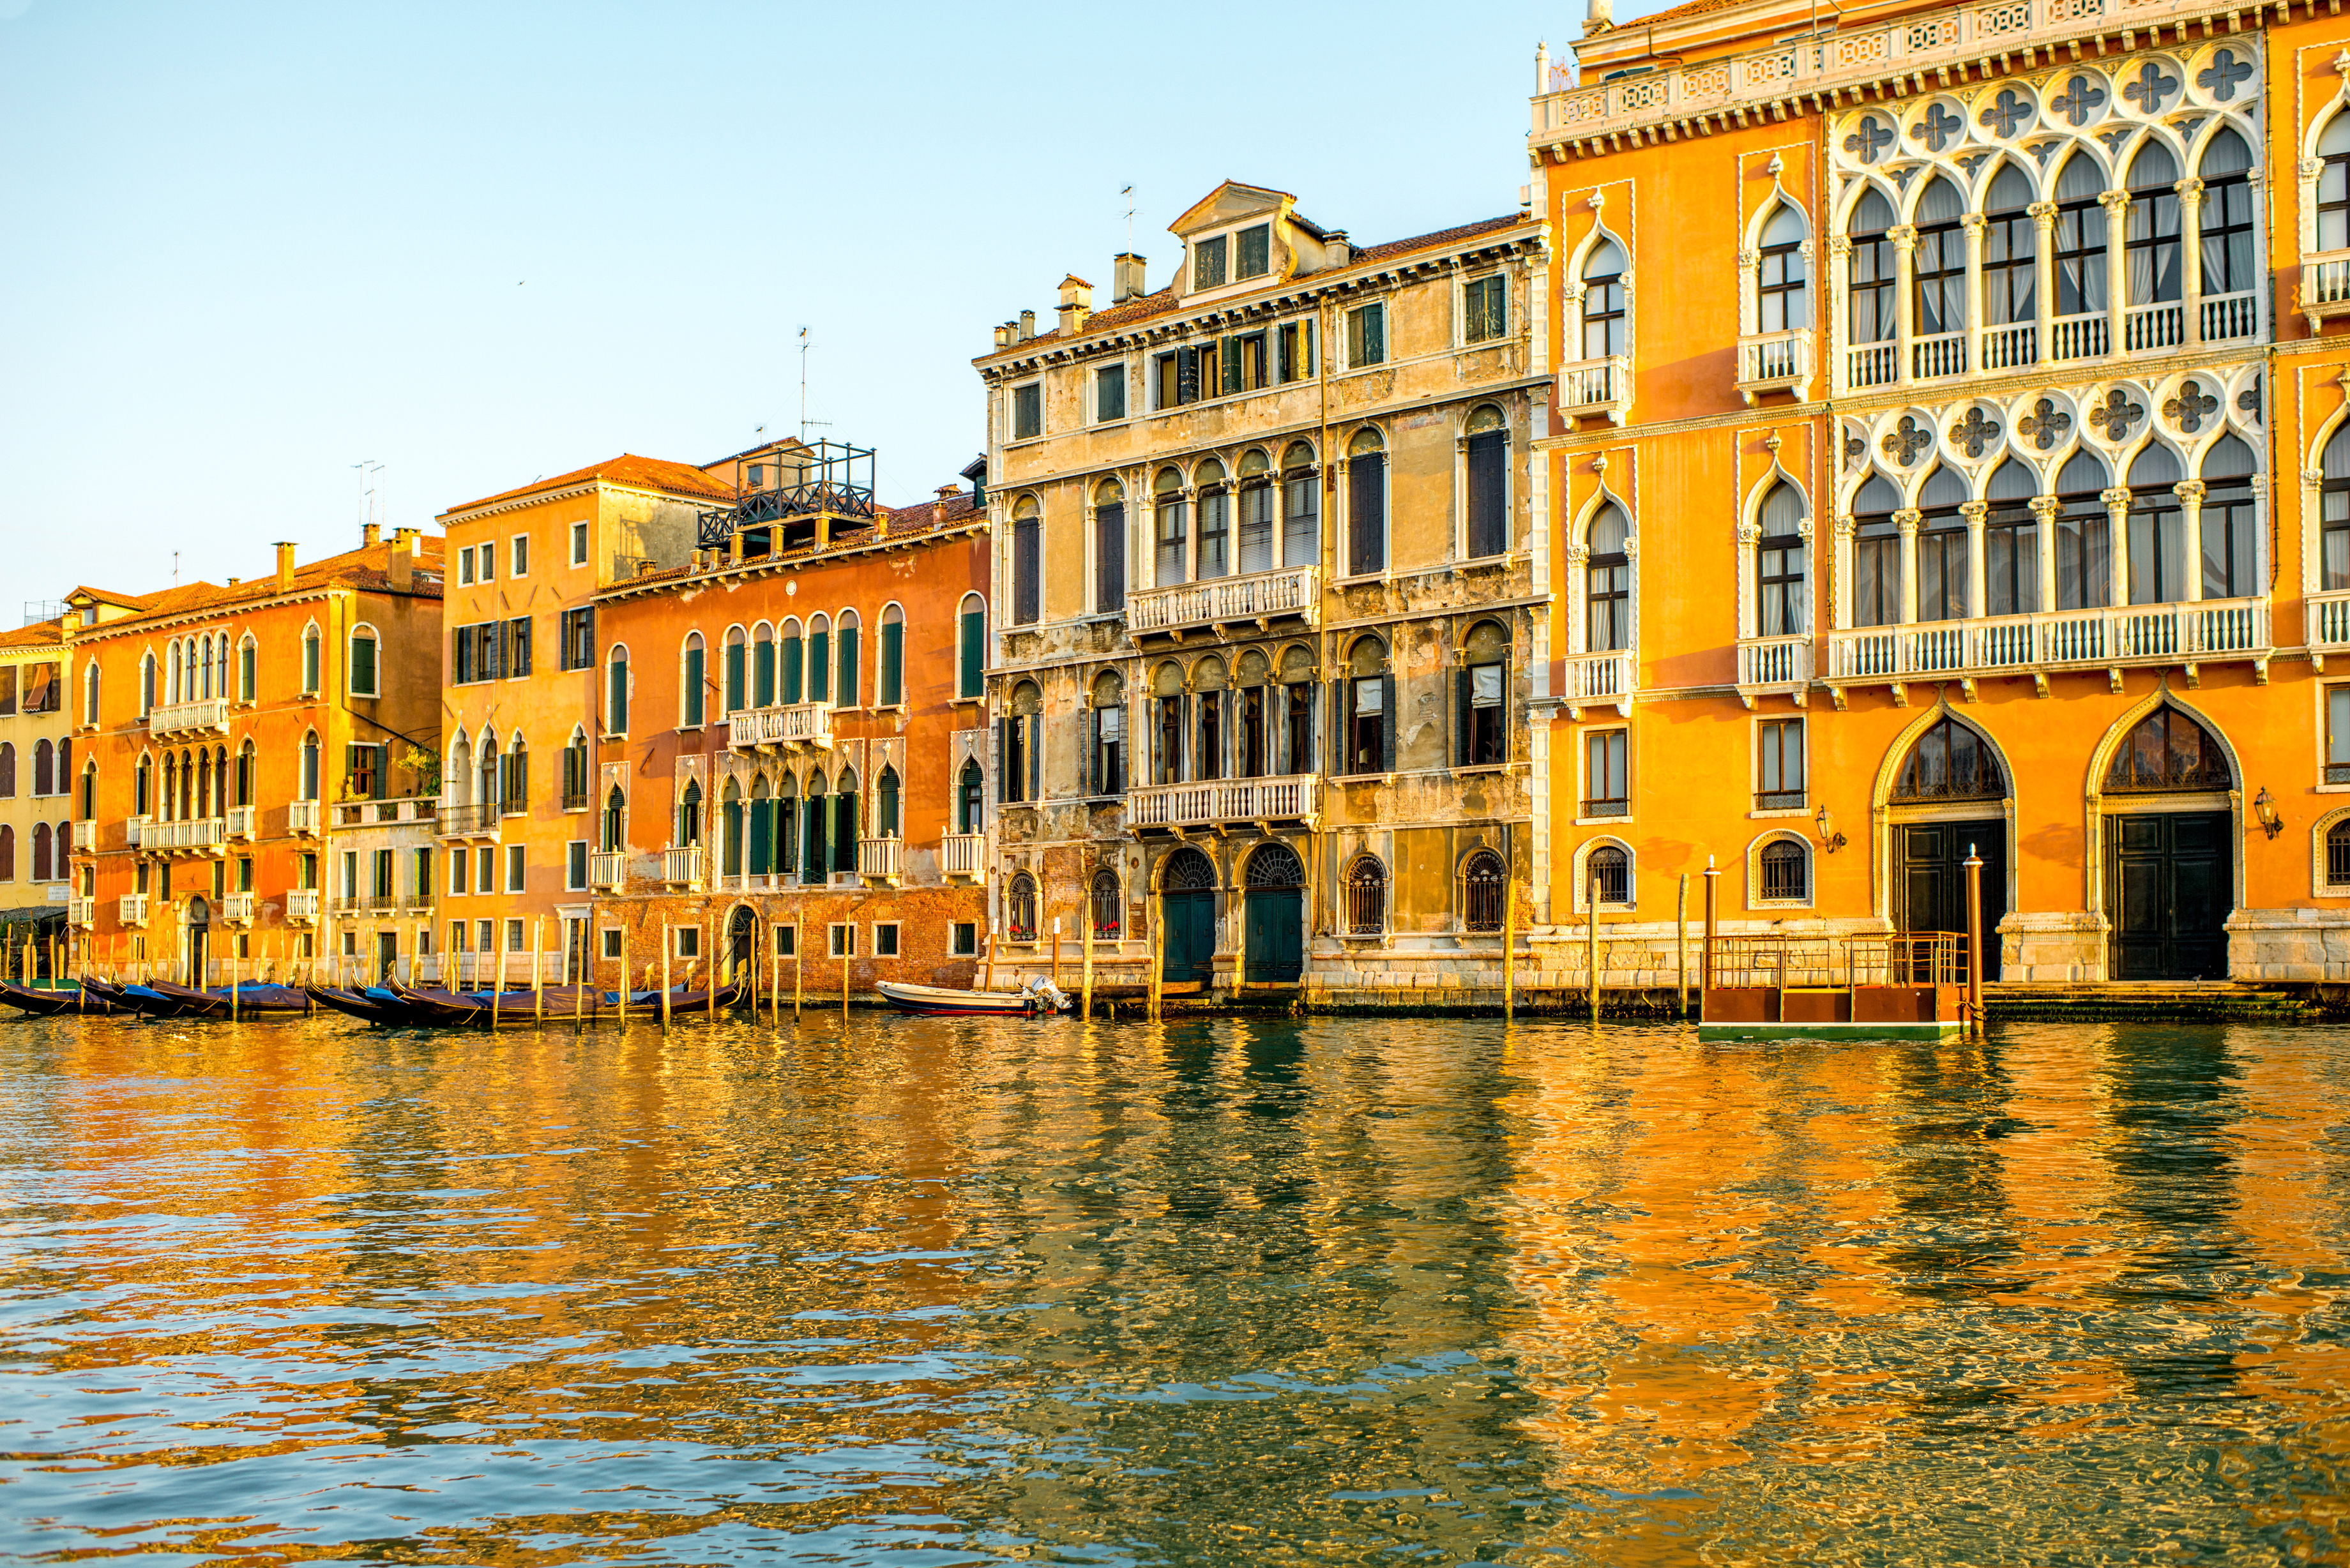 Architecture Building Grand Canal House Venice 3680x2456